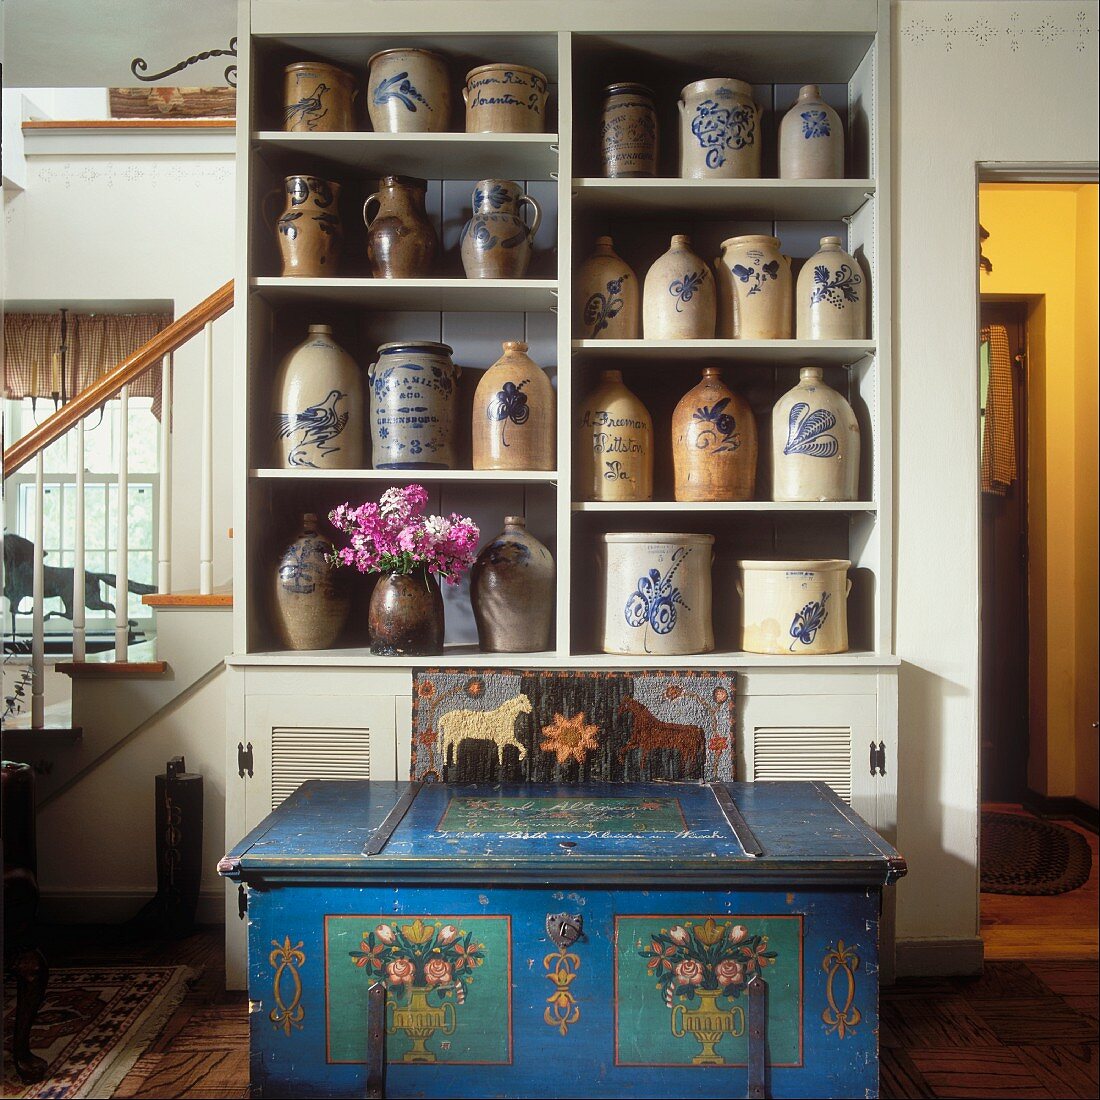 Shelving holding collection of 19th century stoneware with blue, hand-painted trunk in foreground